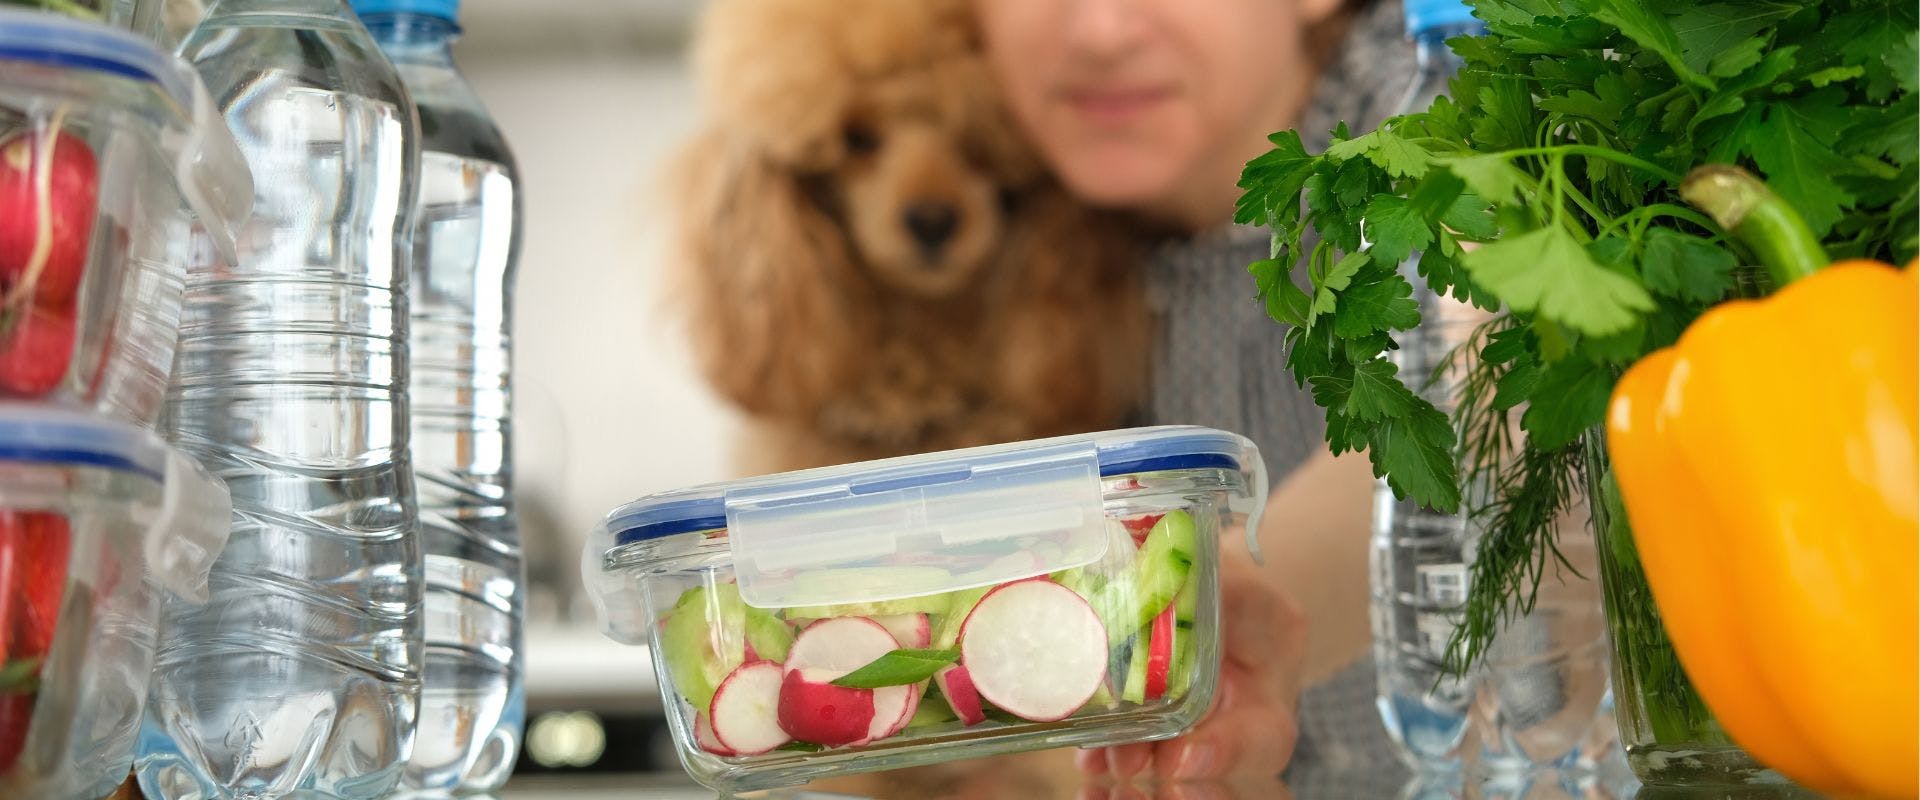 Poodle dog looking at radishes slices in a tub